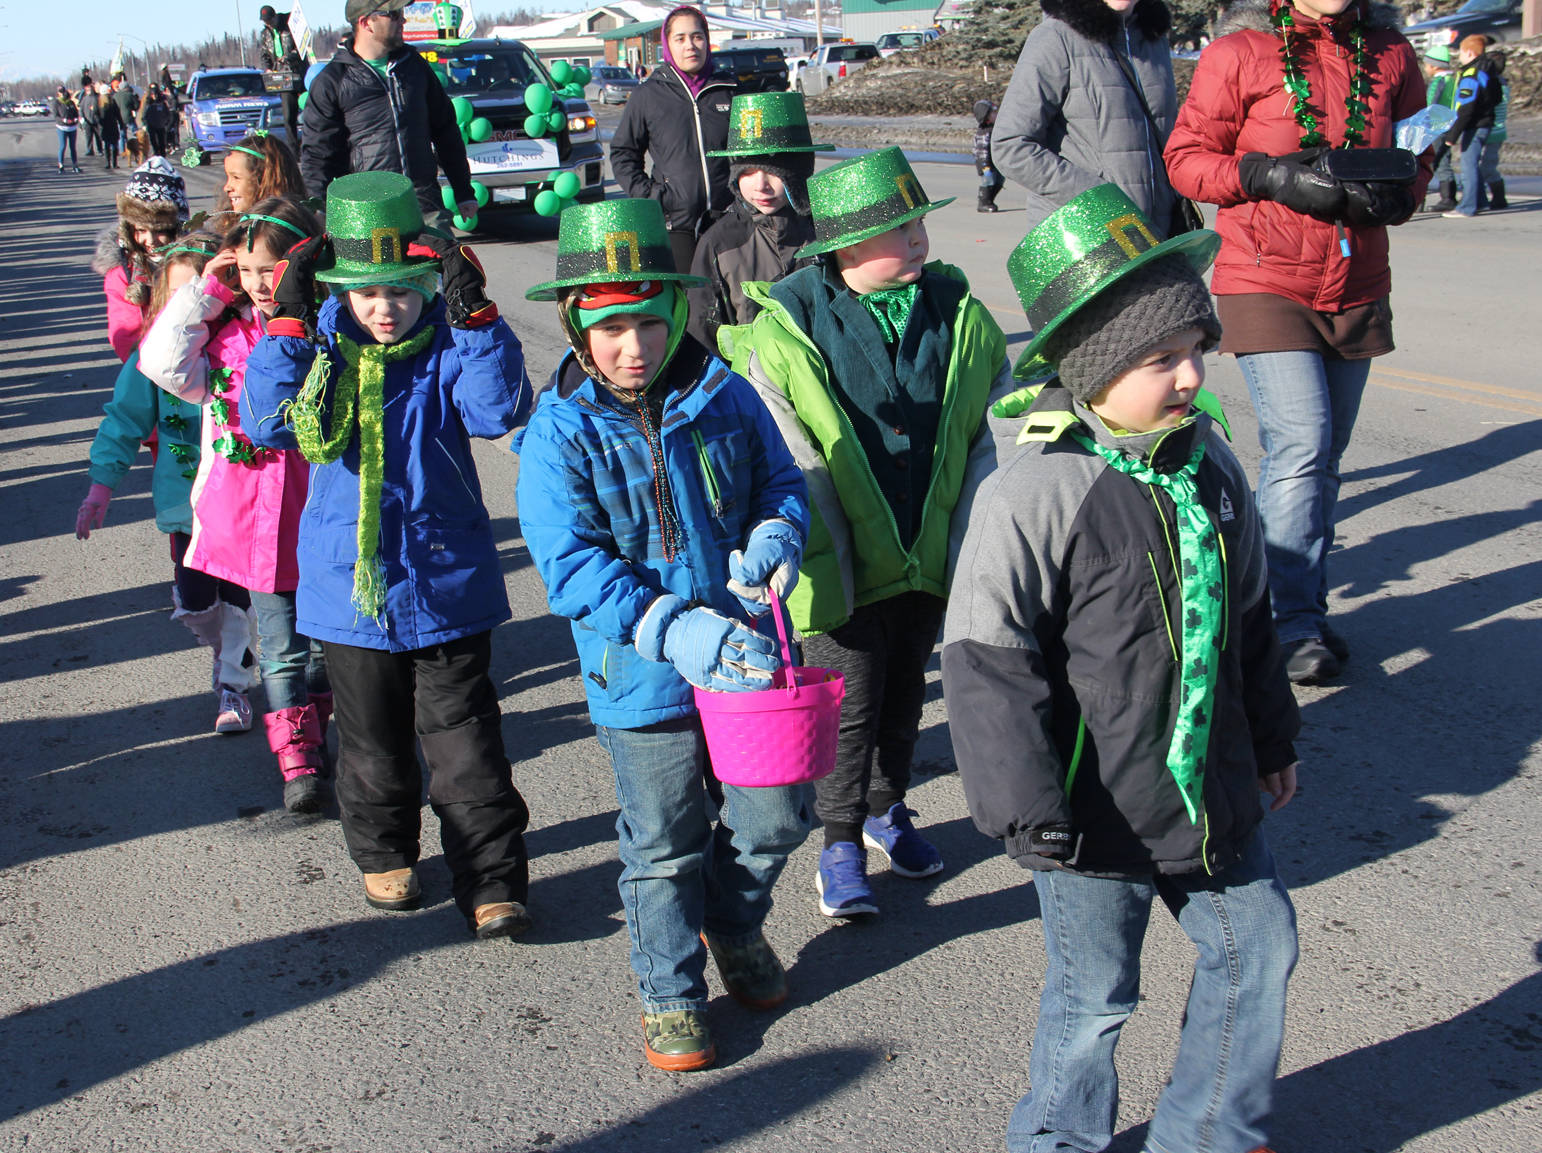 Participants march in Soldotna’s St. Patrick’s Day parade.